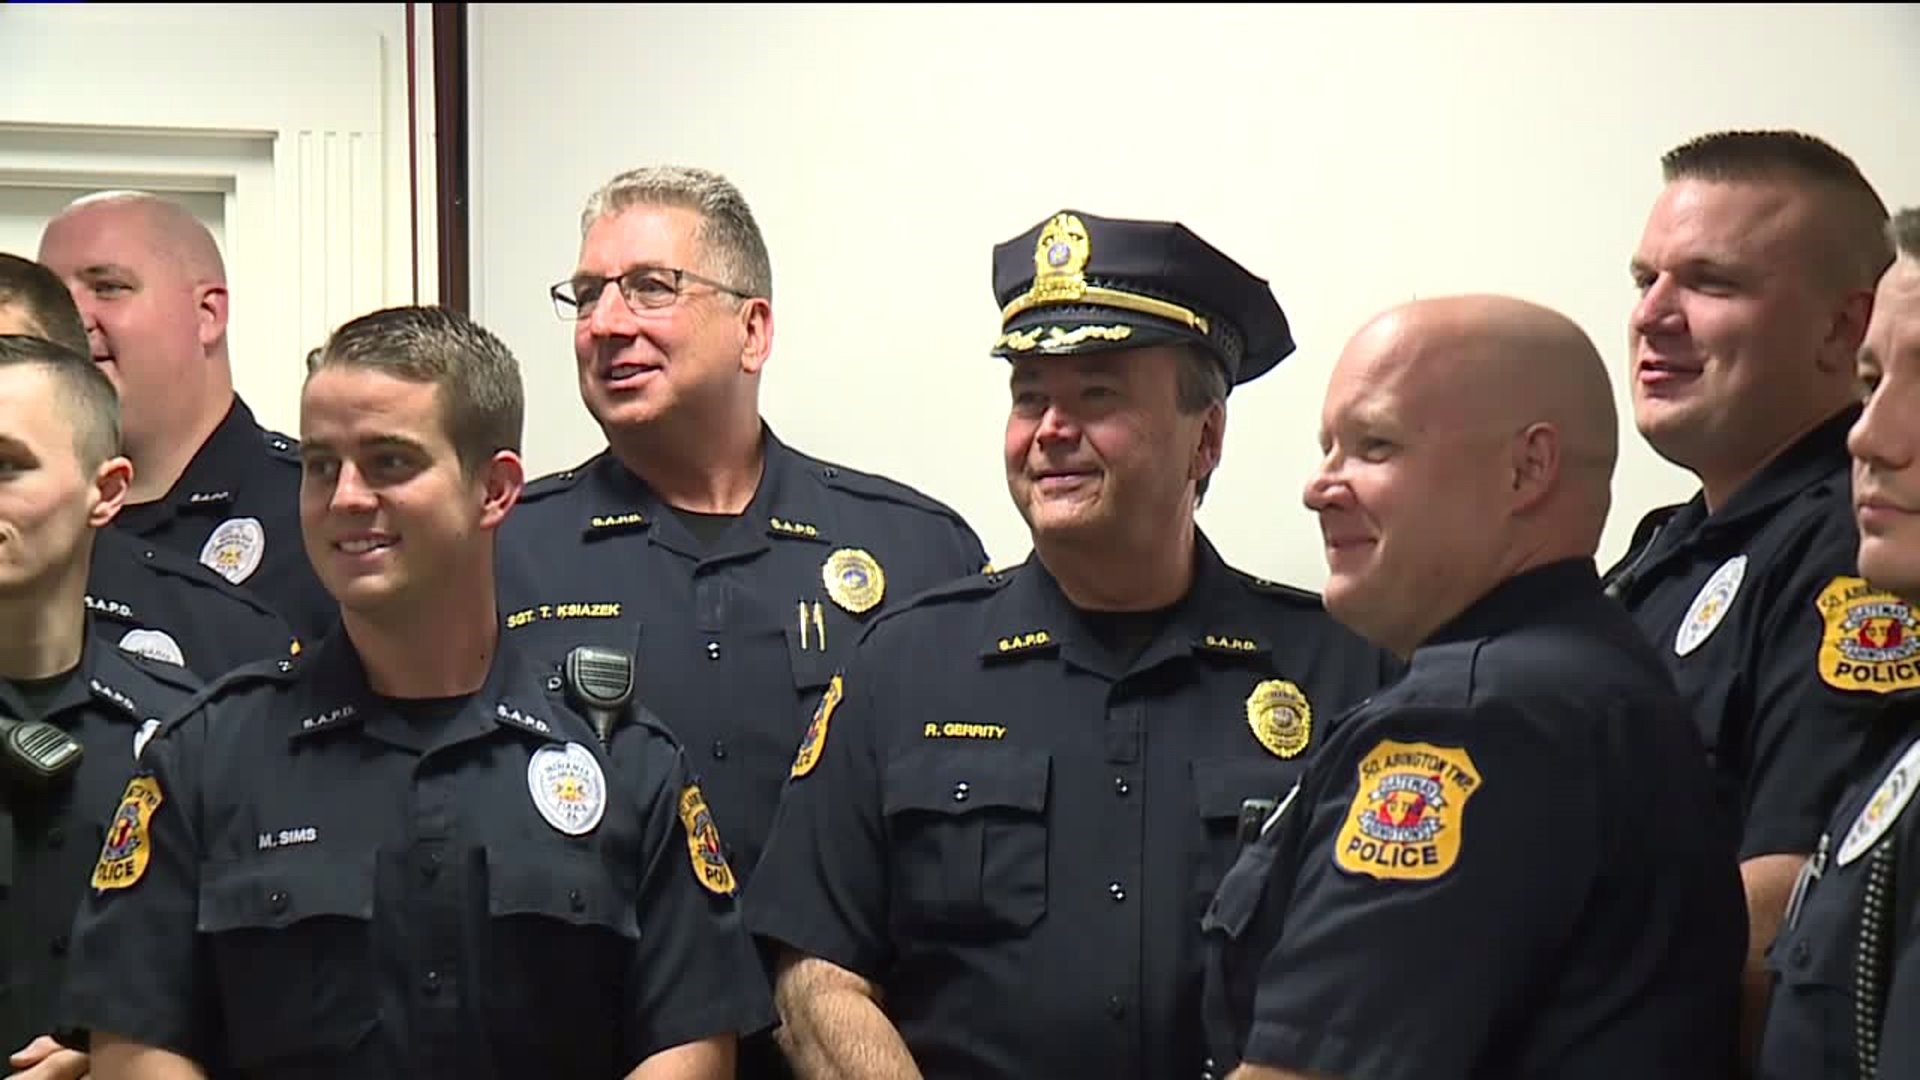 Police Chief Honored for 40 Years of Service